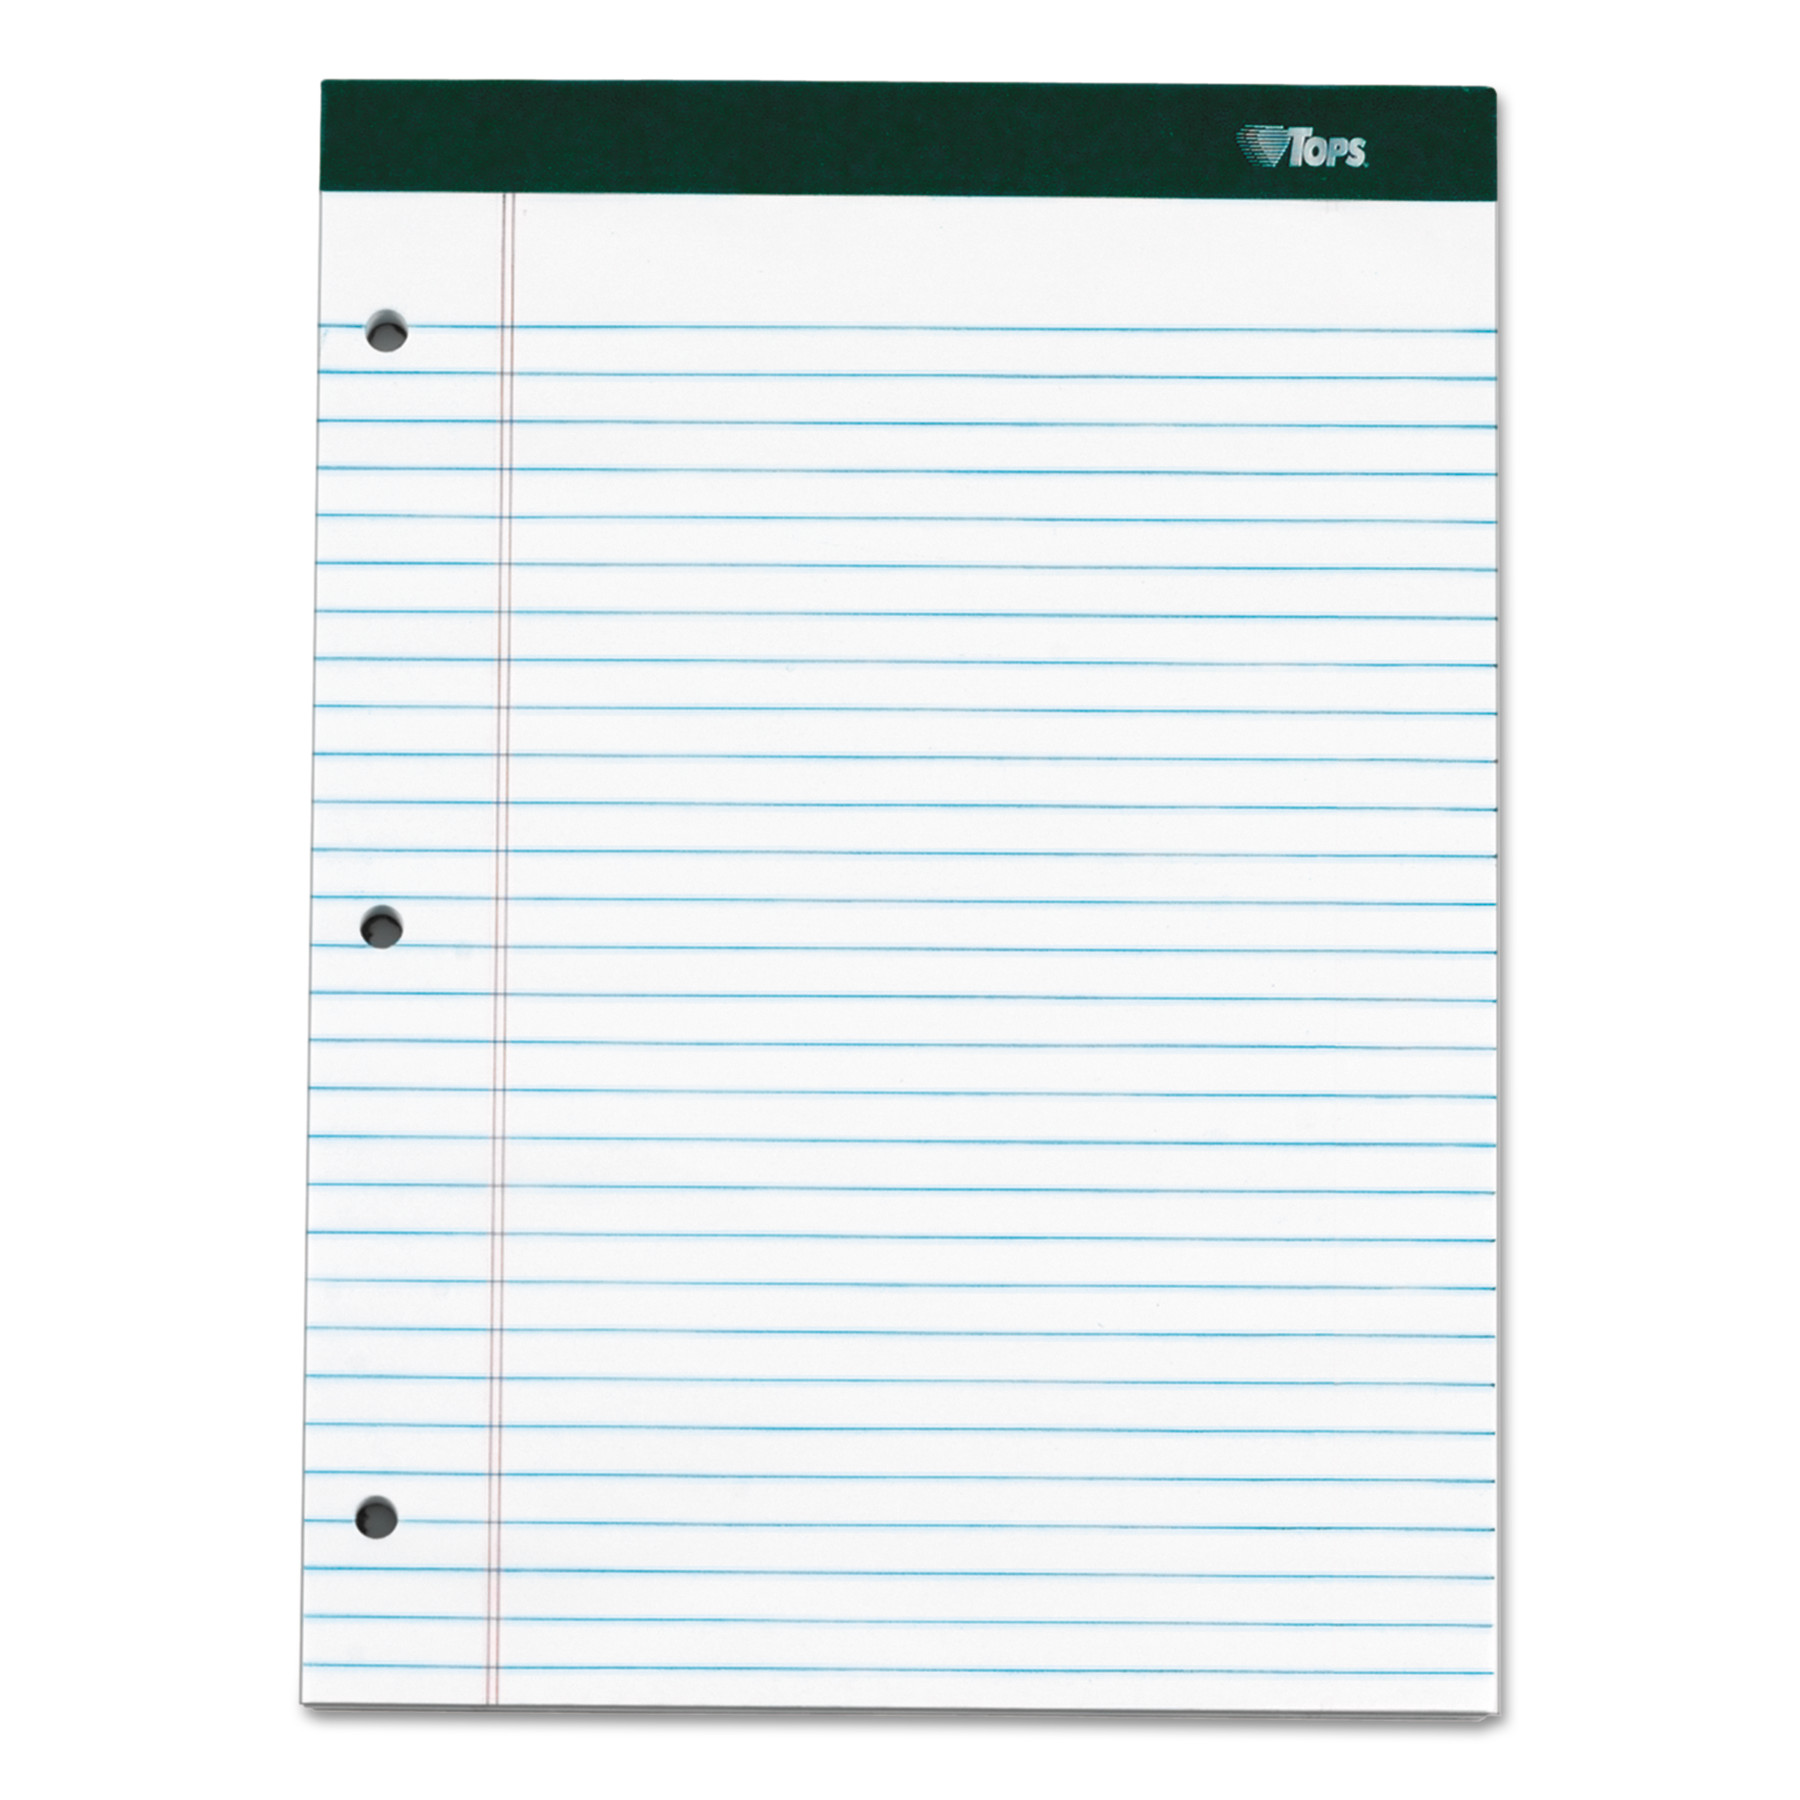 TOPS Docket 3-hole Punched Legal Ruled Legal Pads - 100 Sheets - Double Stitched - 0.34" Ruled - 16 lb Basis Weight - 8 1/2" x 1